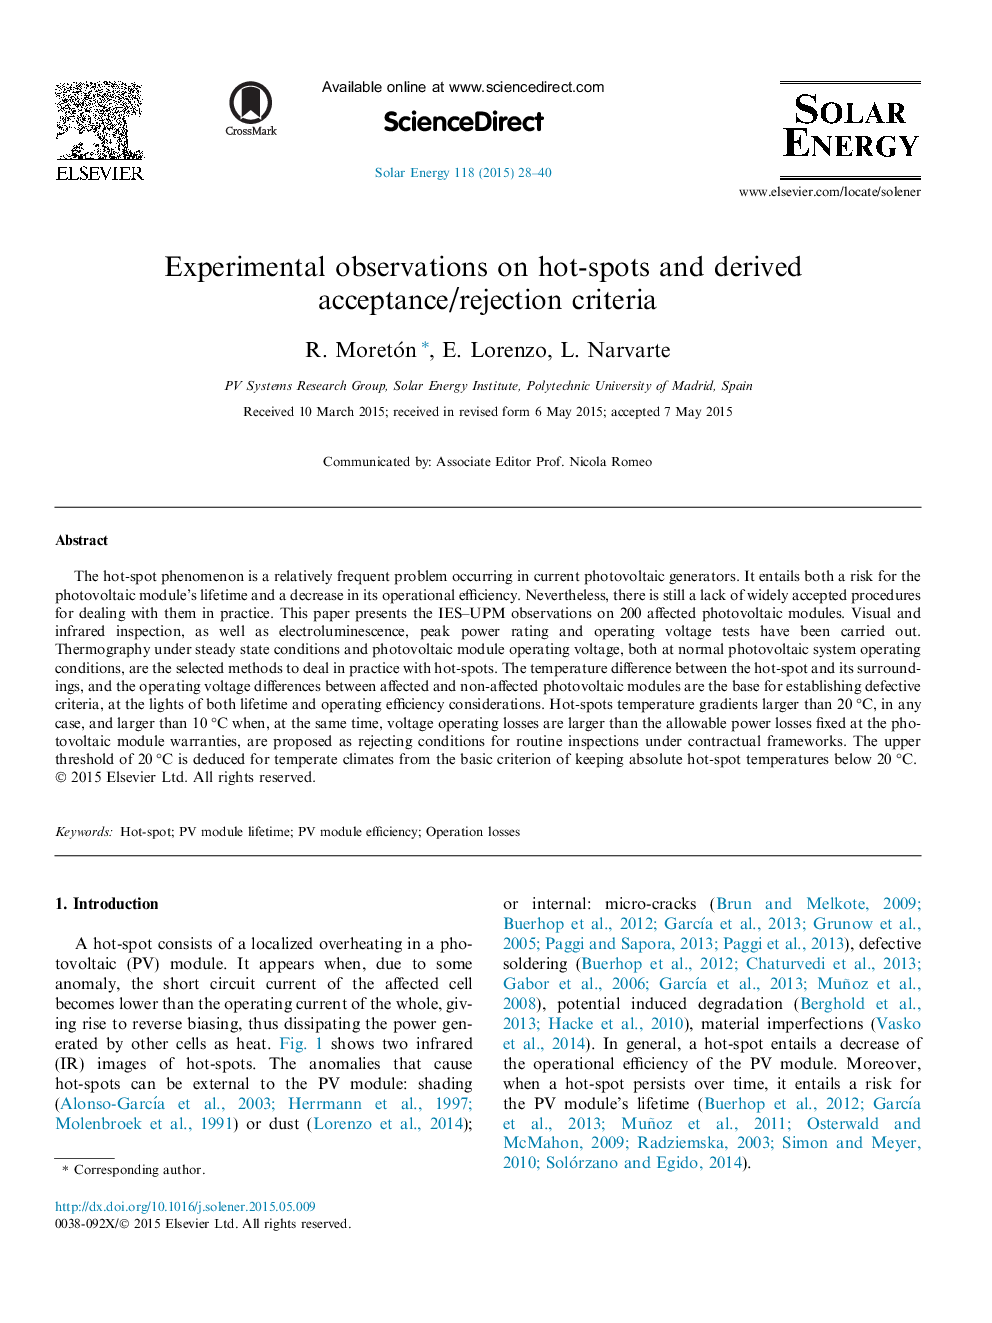 Experimental observations on hot-spots and derived acceptance/rejection criteria